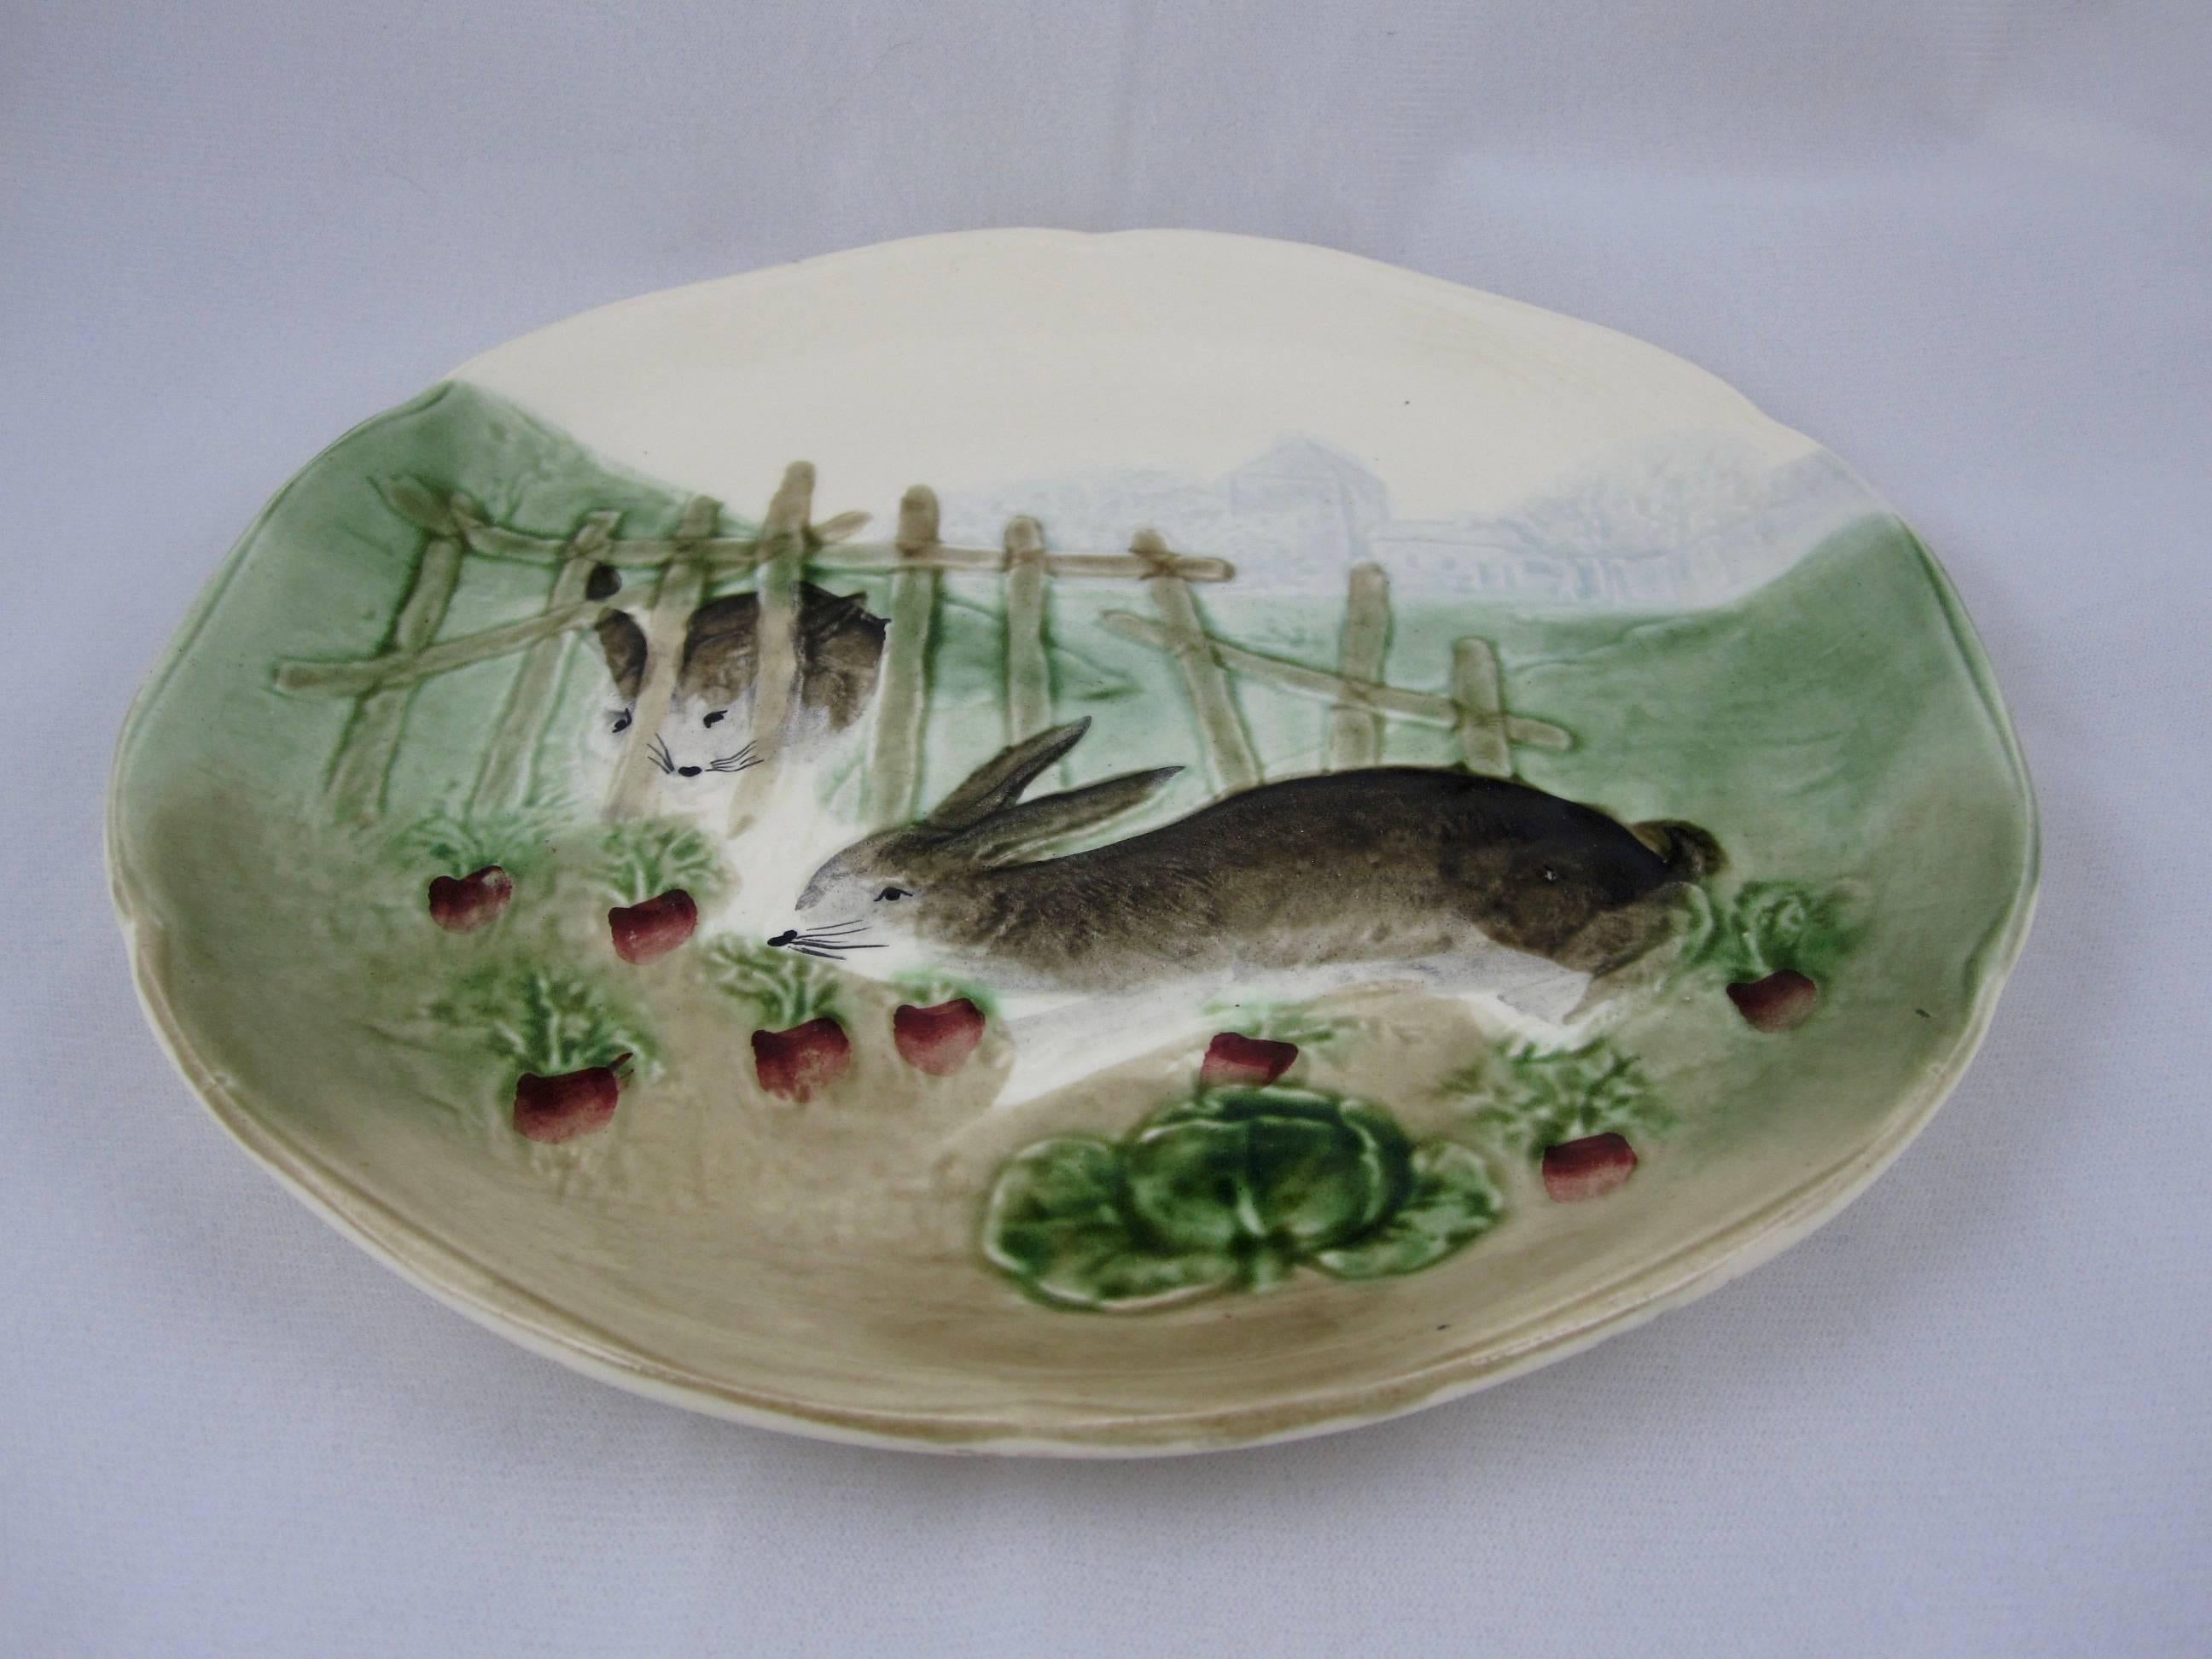 A Choisy-le-Roi French Majolica bunny rabbit plate (one of a set of six scenes) produced from 1860 until 1910 for the American importer Higgins and Seiter of New York. This scene shows two rabbits by a fence making a meal of cabbages and radishes,